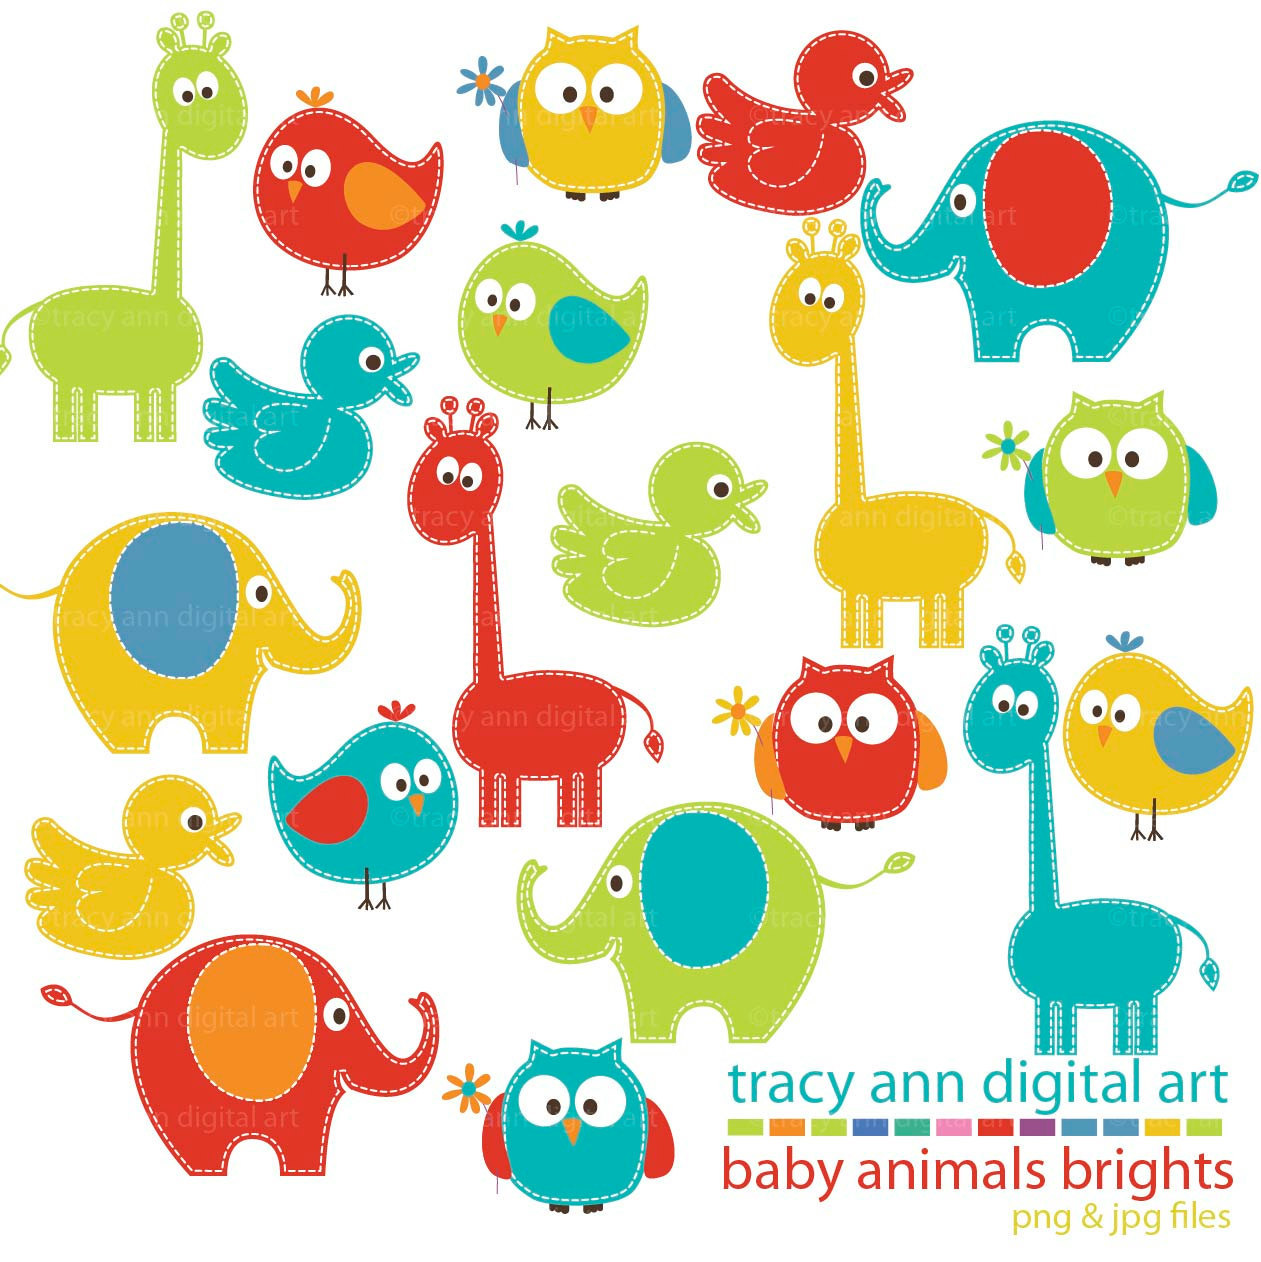 Popular items for baby animals clipart 